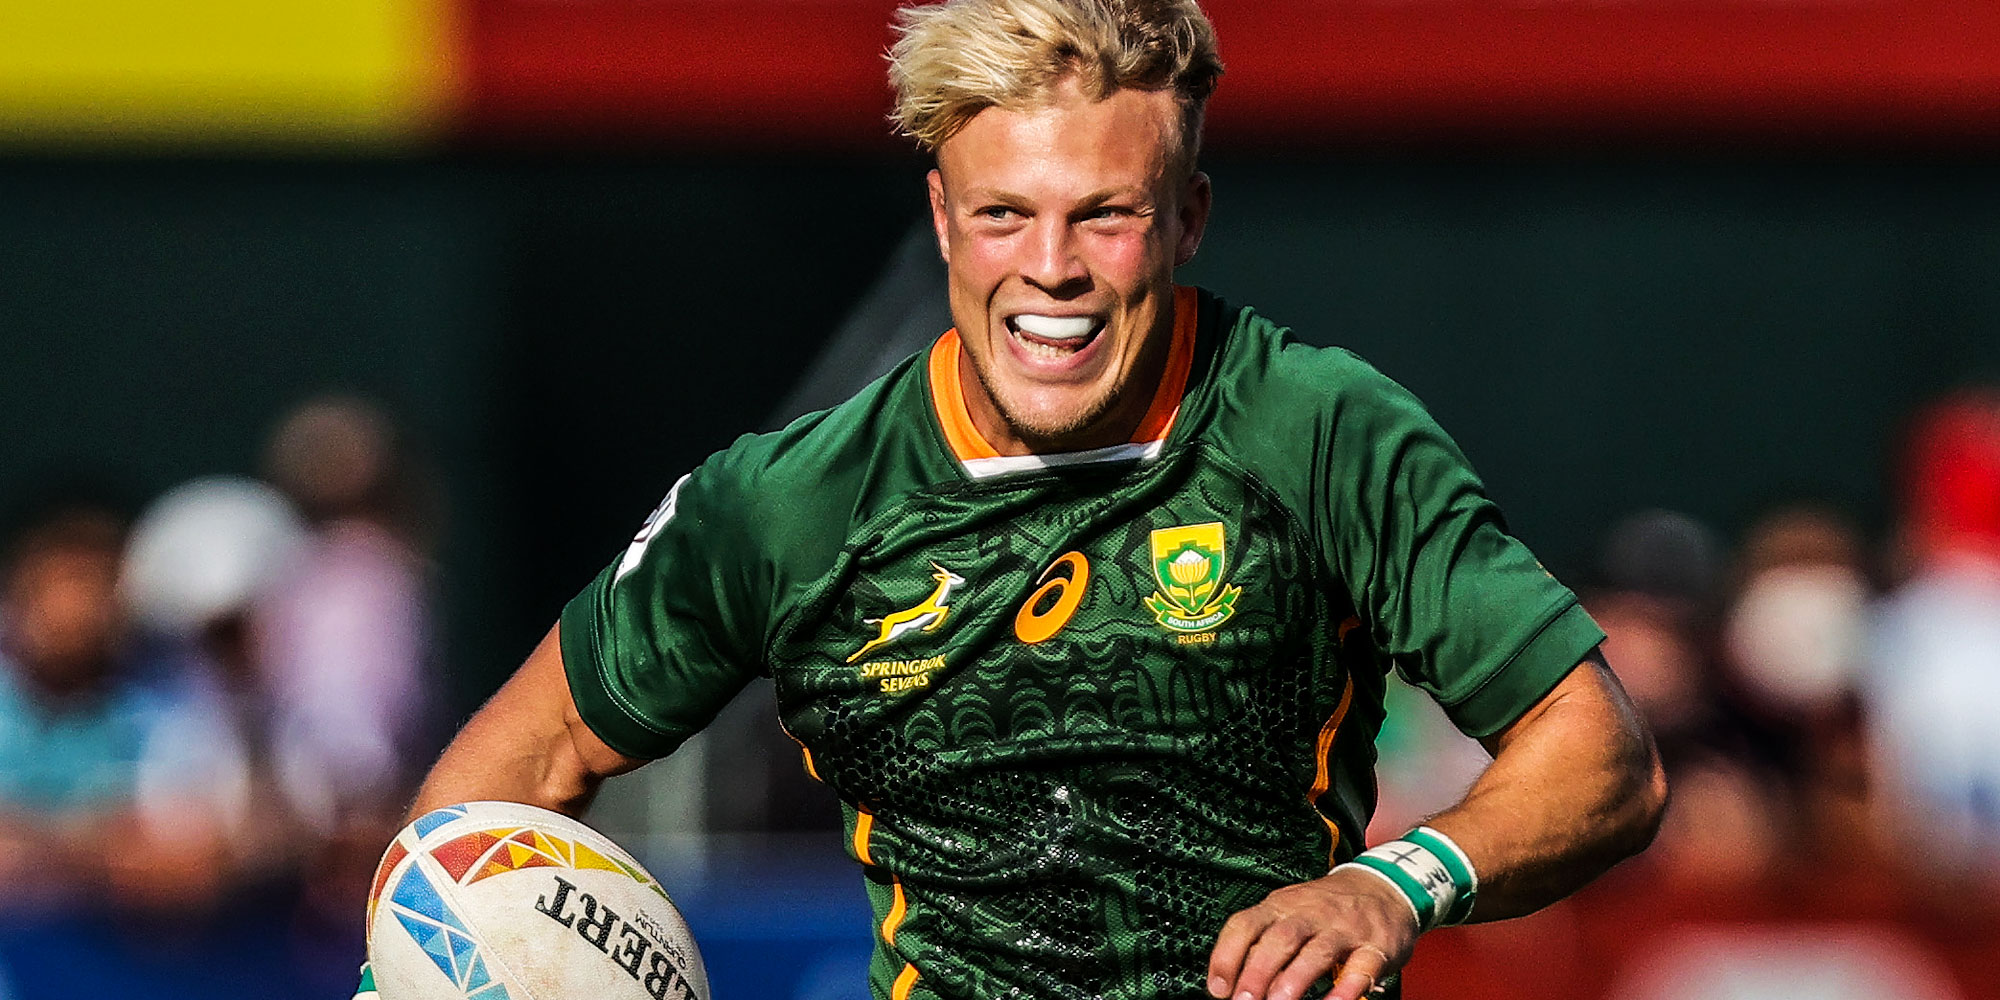 JC Pretorius scored the match winning tries in the semi-final against France and the final against Australia.